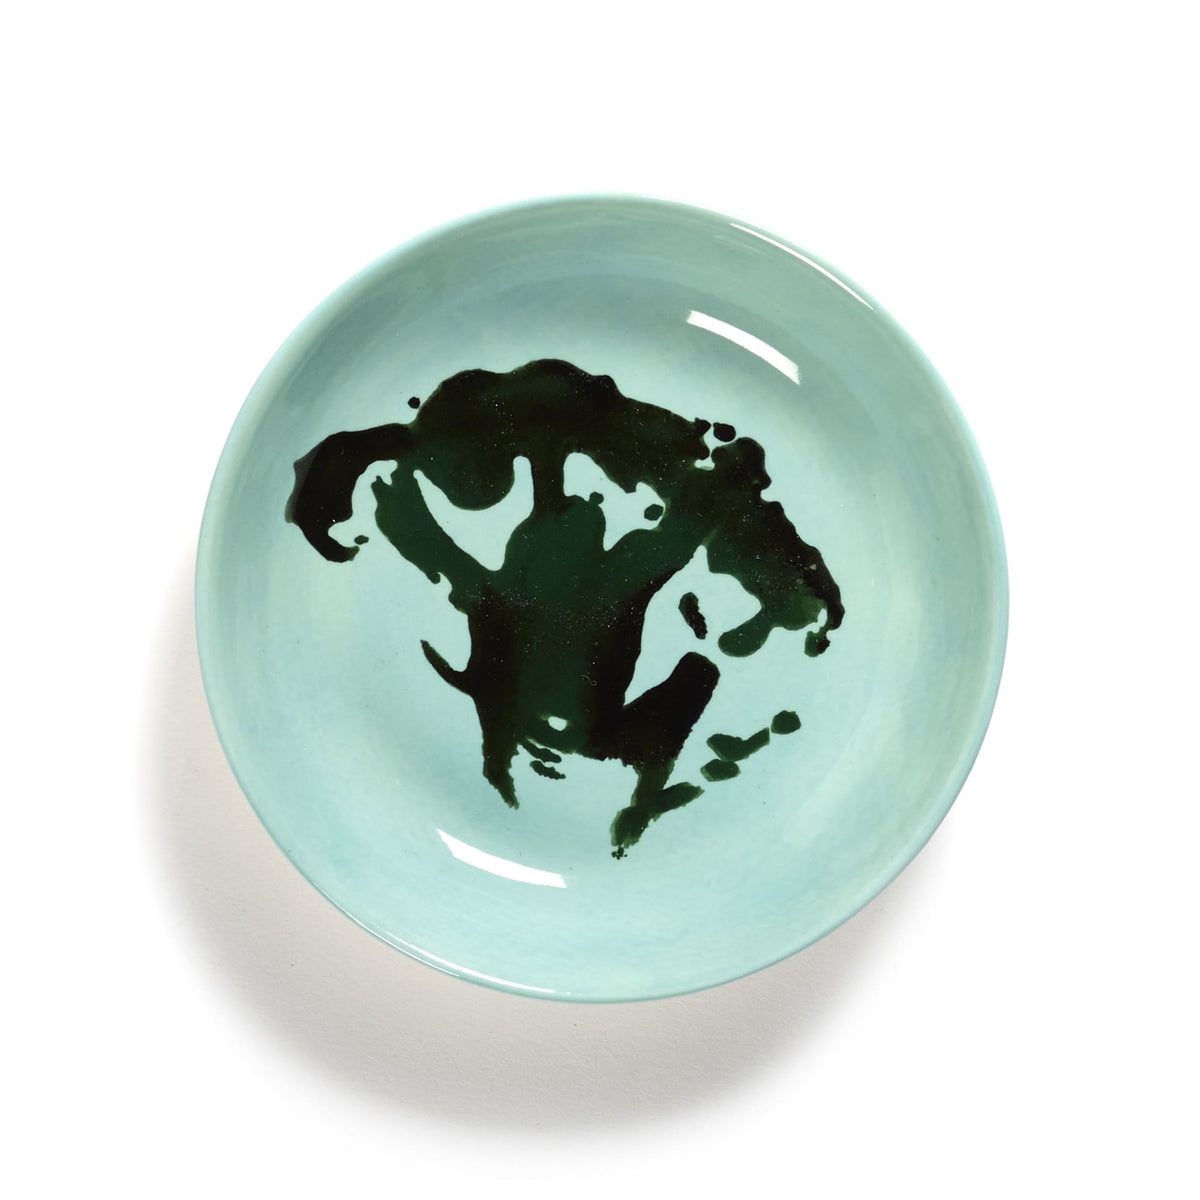 Azure Dish with Green Broccoli Motif - S